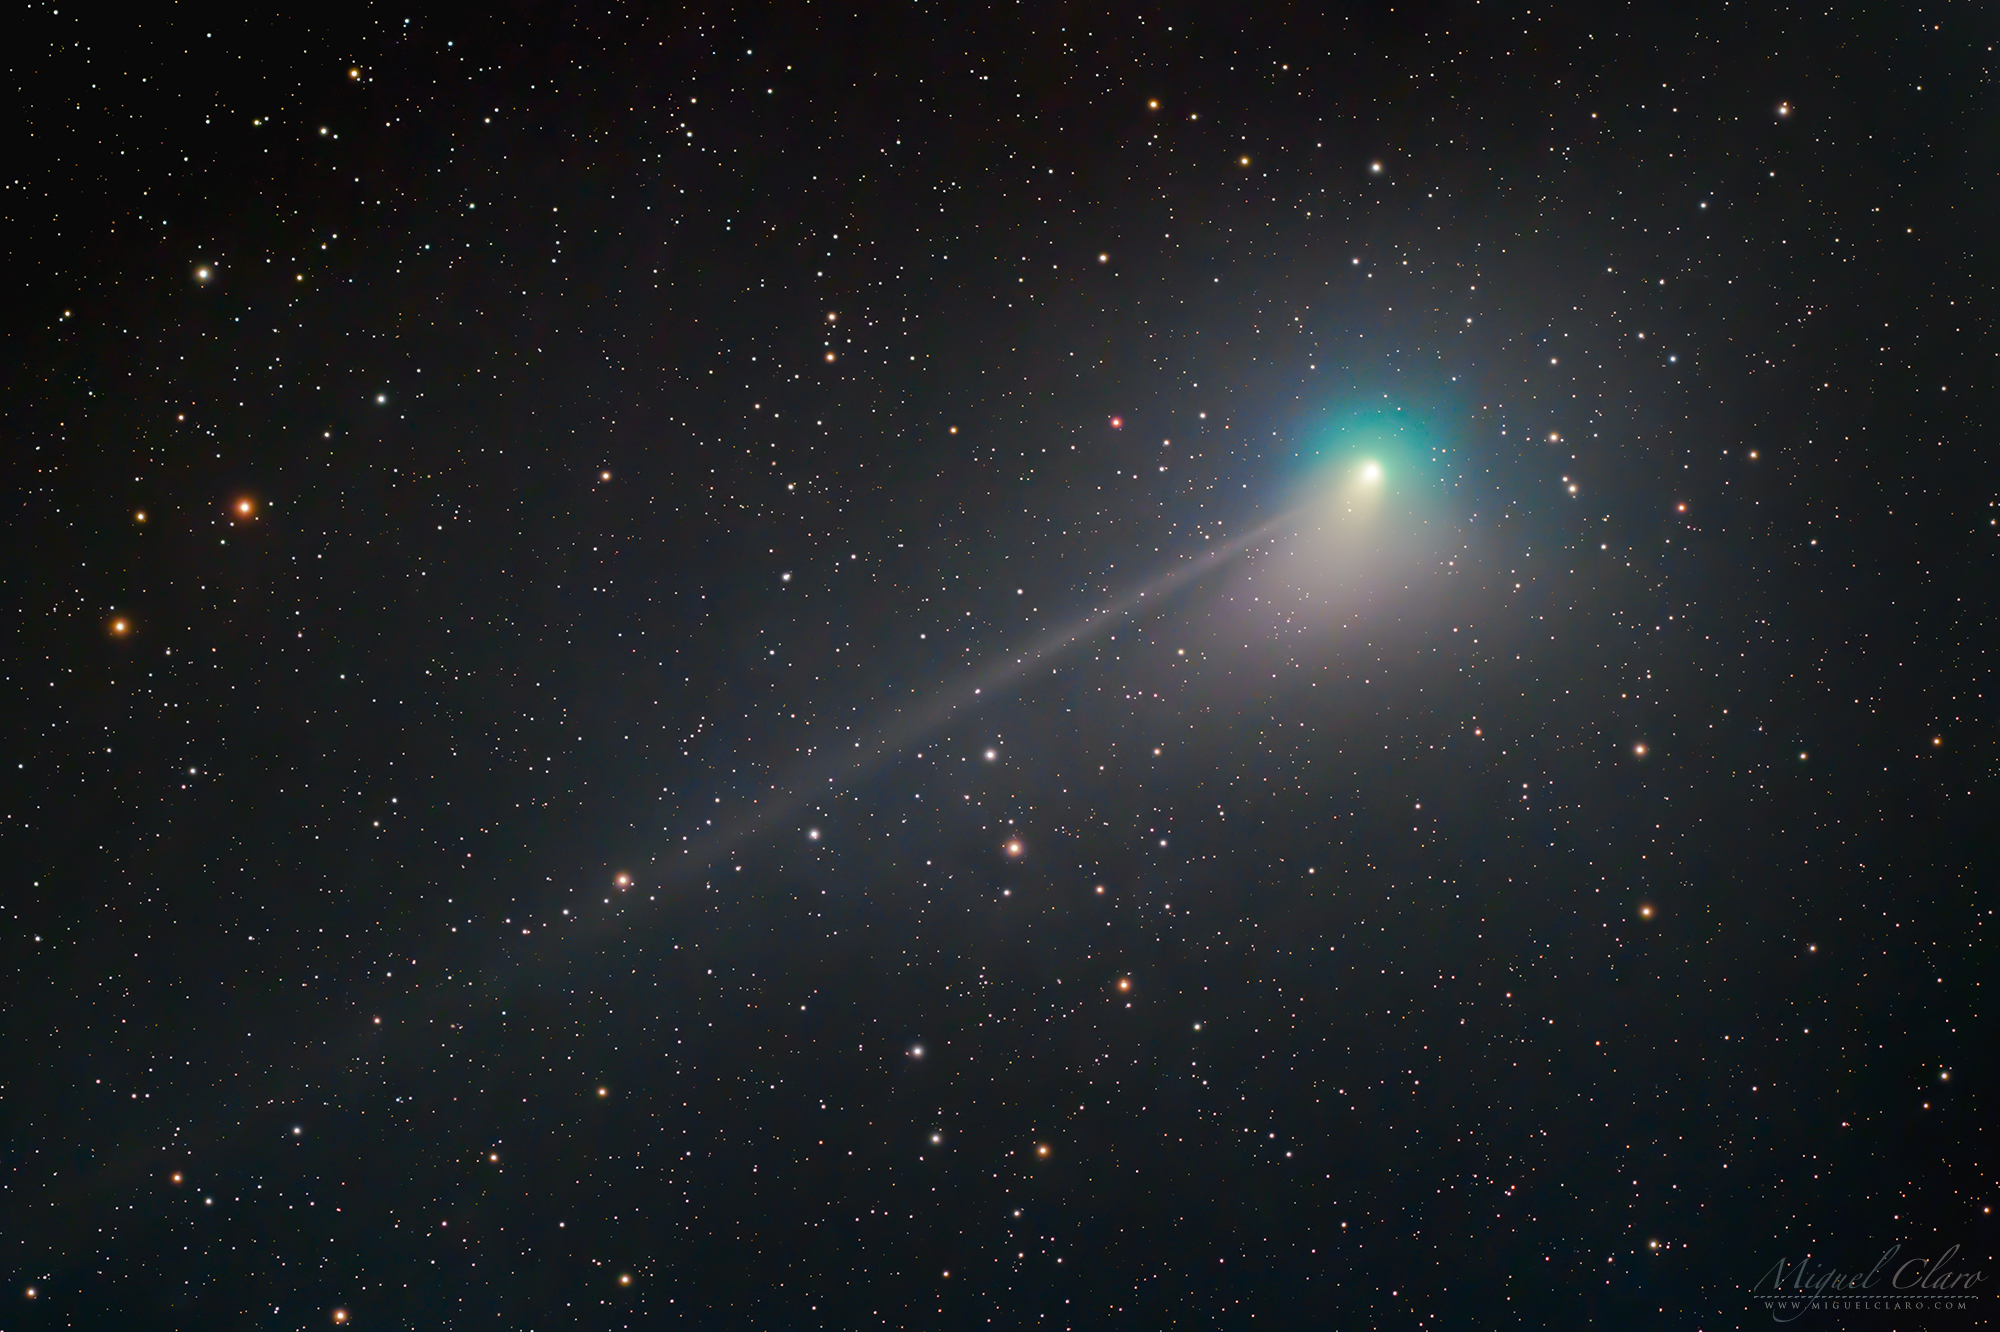 Comet C/2022 E3 (ZTF) as photographed by Miguel Claro in Portugal.